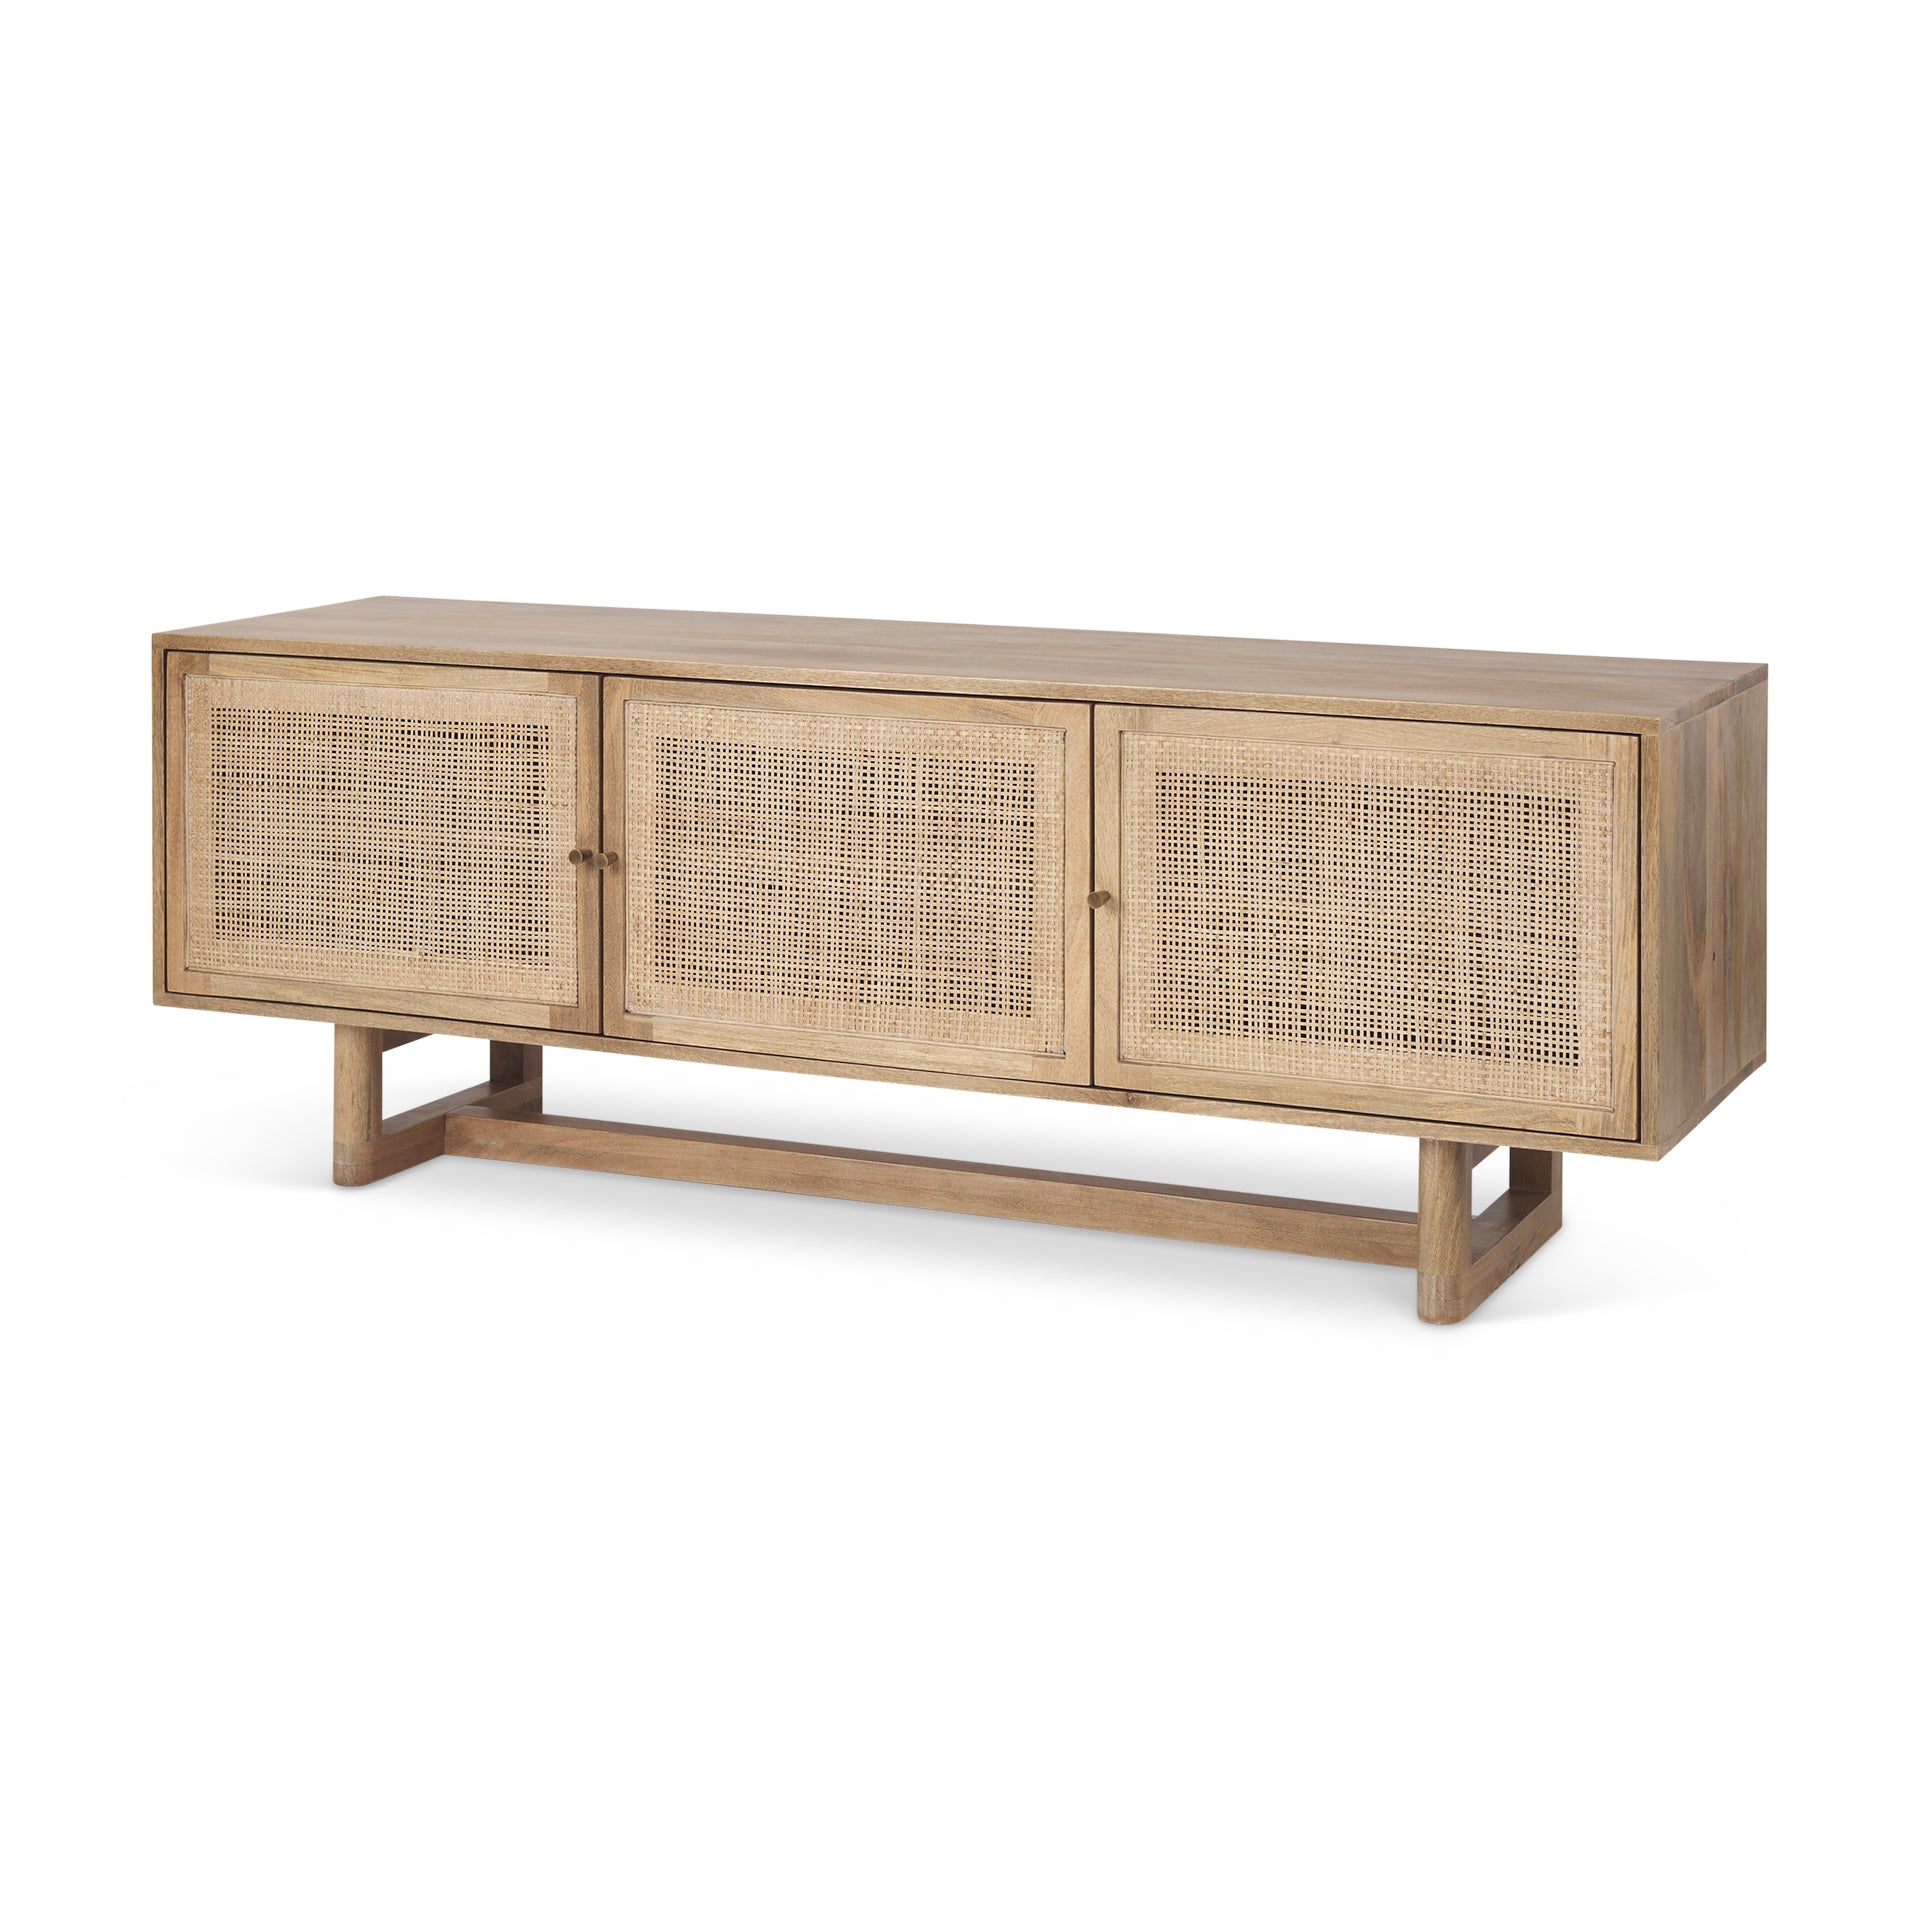 Grier Media Console - Natural